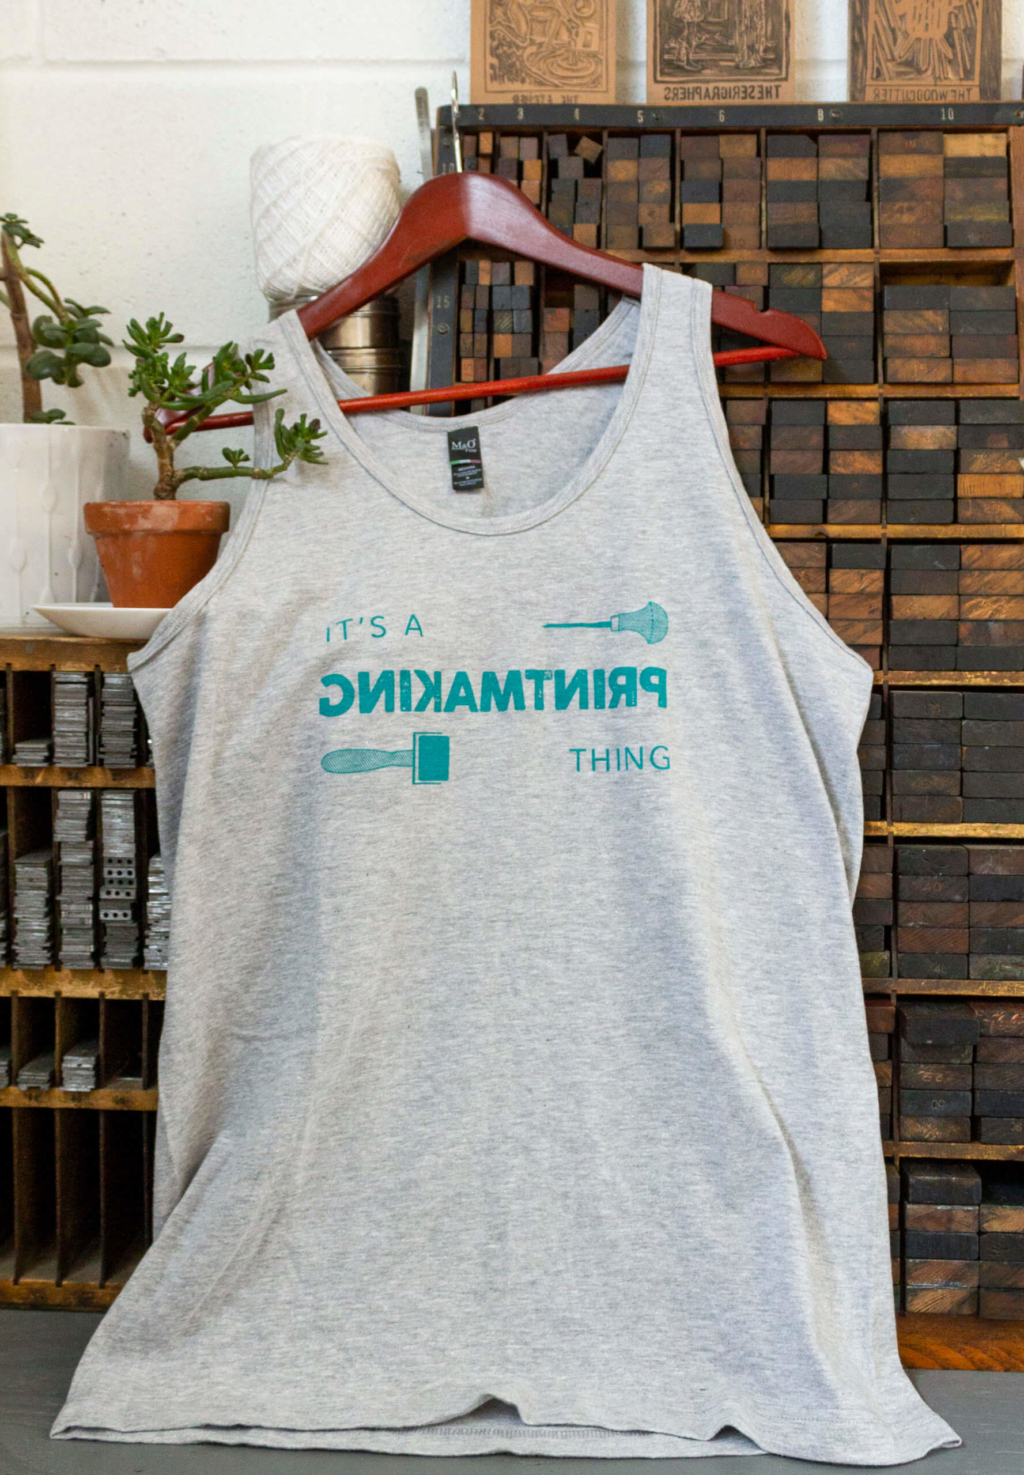 Grey tank top with words "It's a printmaking thing", with the word "Printmaking" written backwards. The text is flanked by illustrations of a lino carving tool and a brayer all printed in the colour of green emulsion.